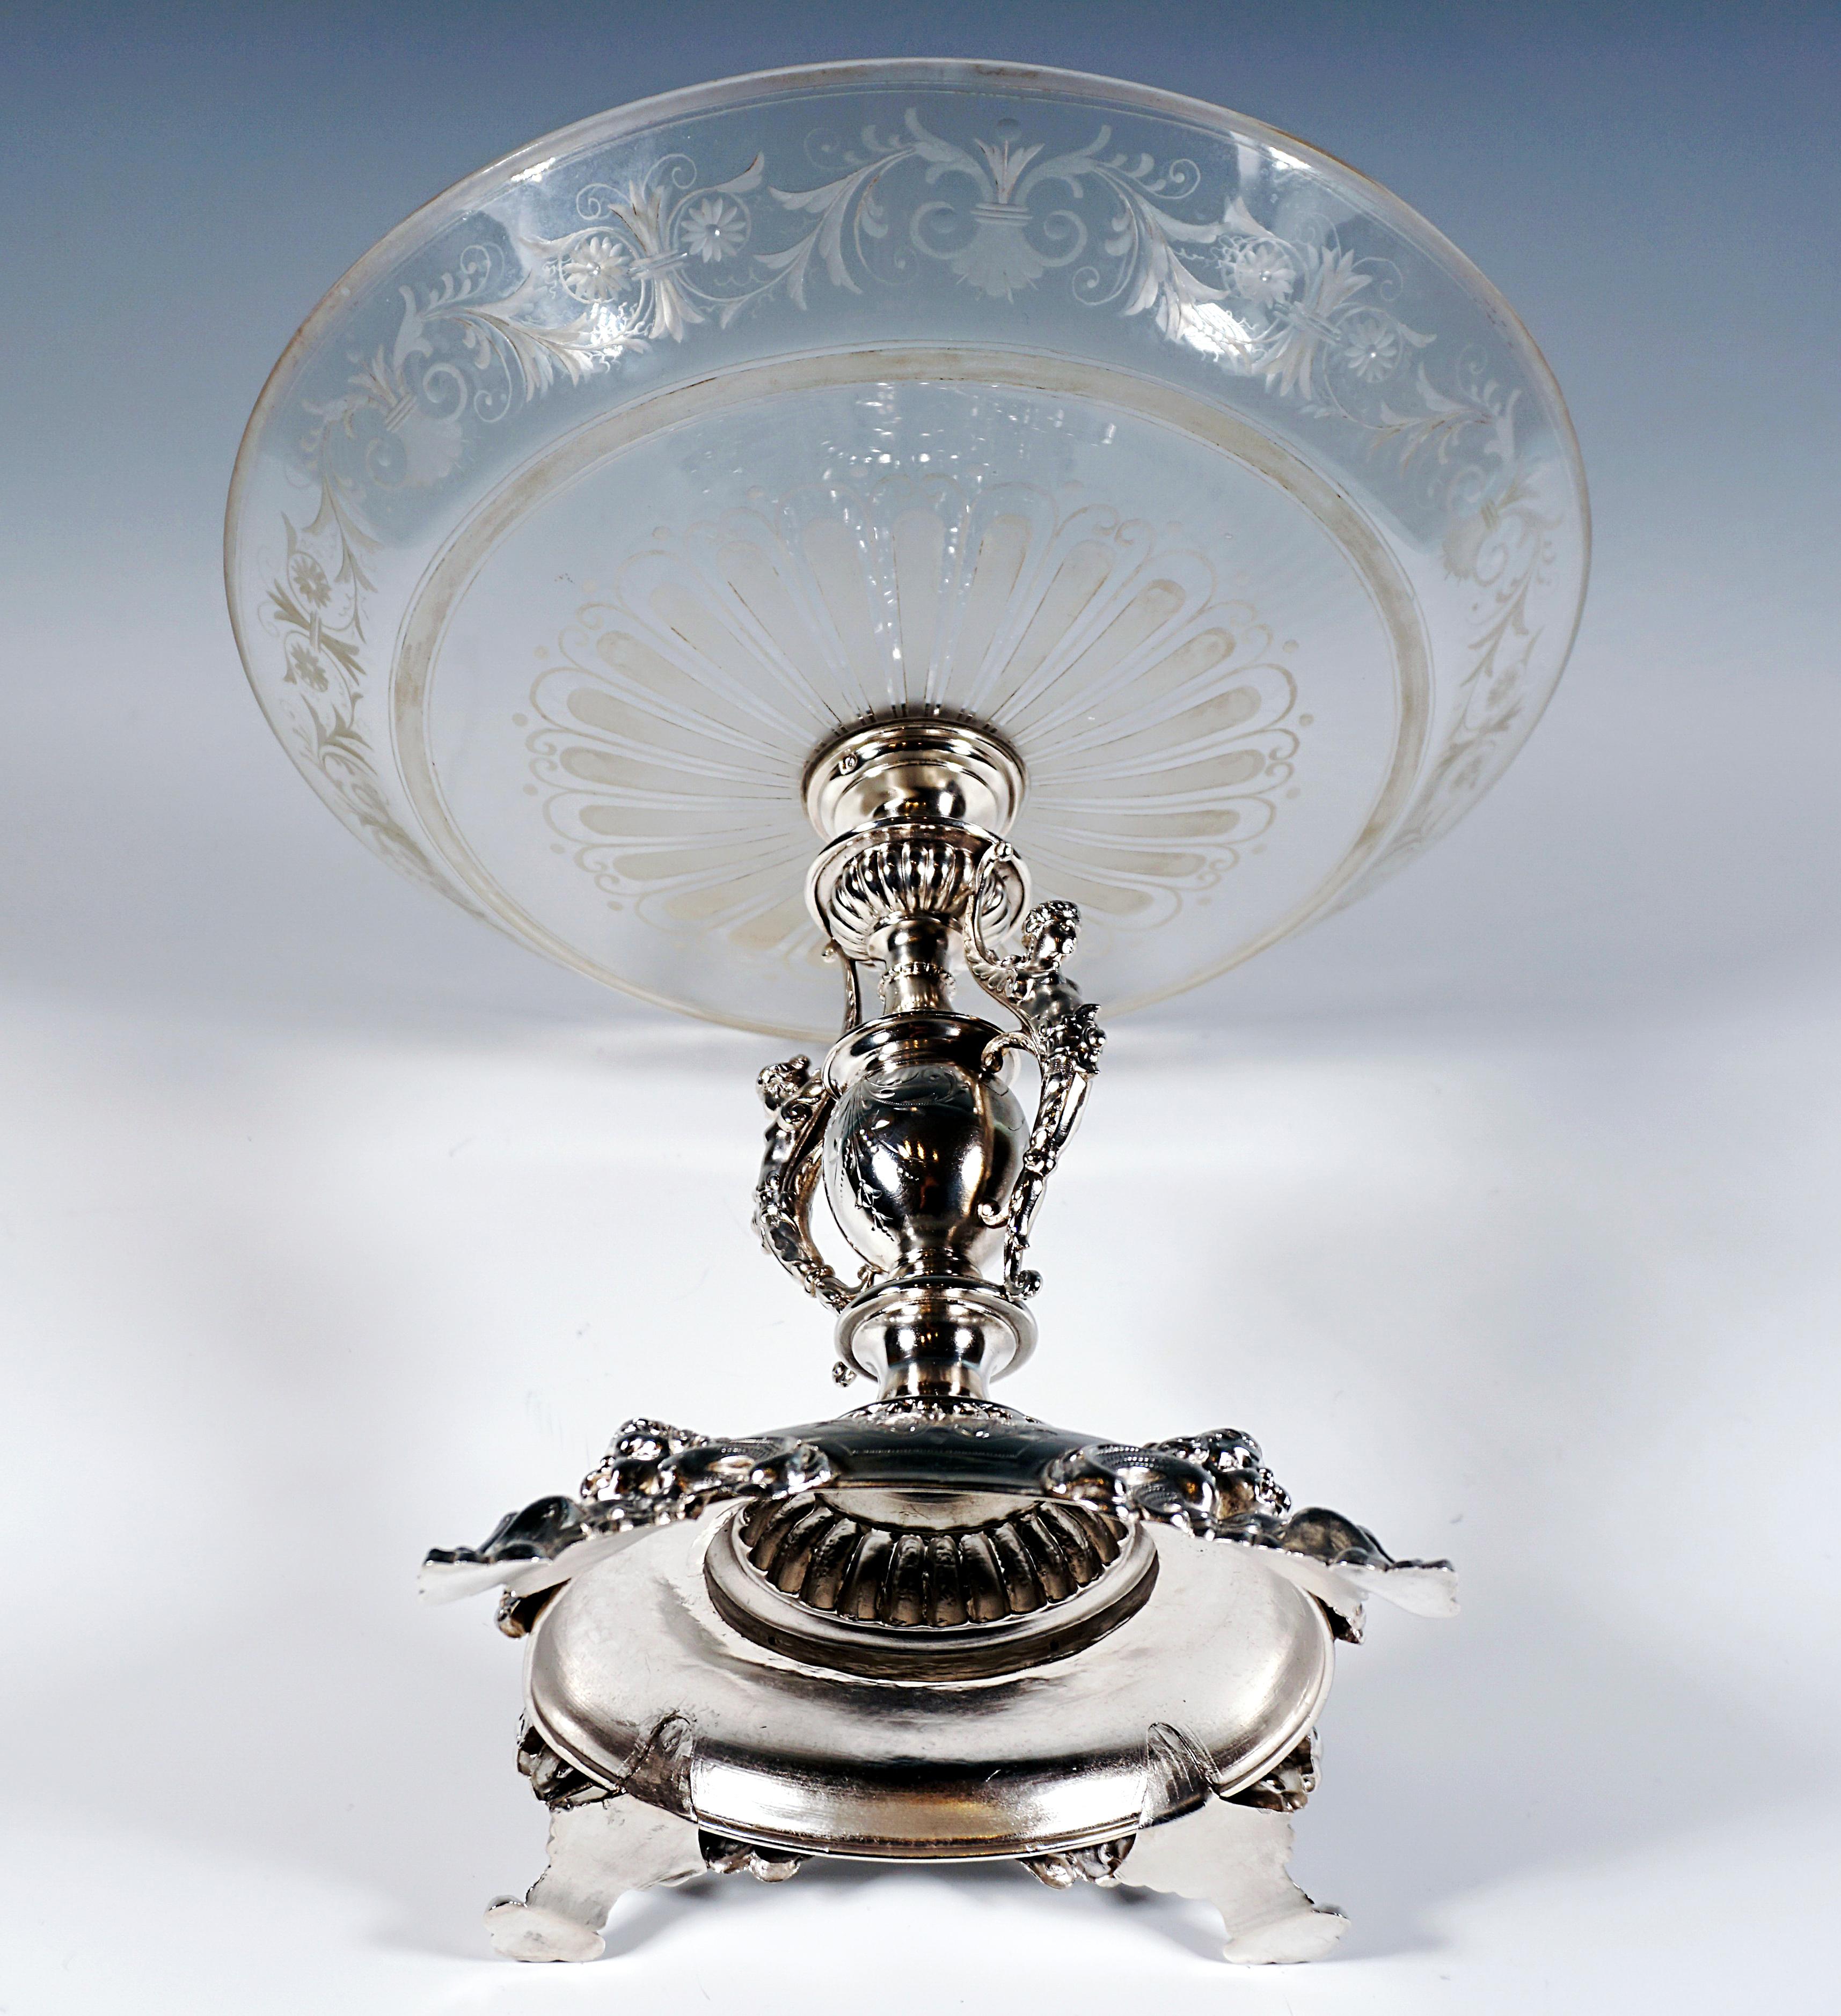 Viennese Art Nouveau Silver Centerpiece With Original Glass Bowl, Around 1900 In Good Condition For Sale In Vienna, AT